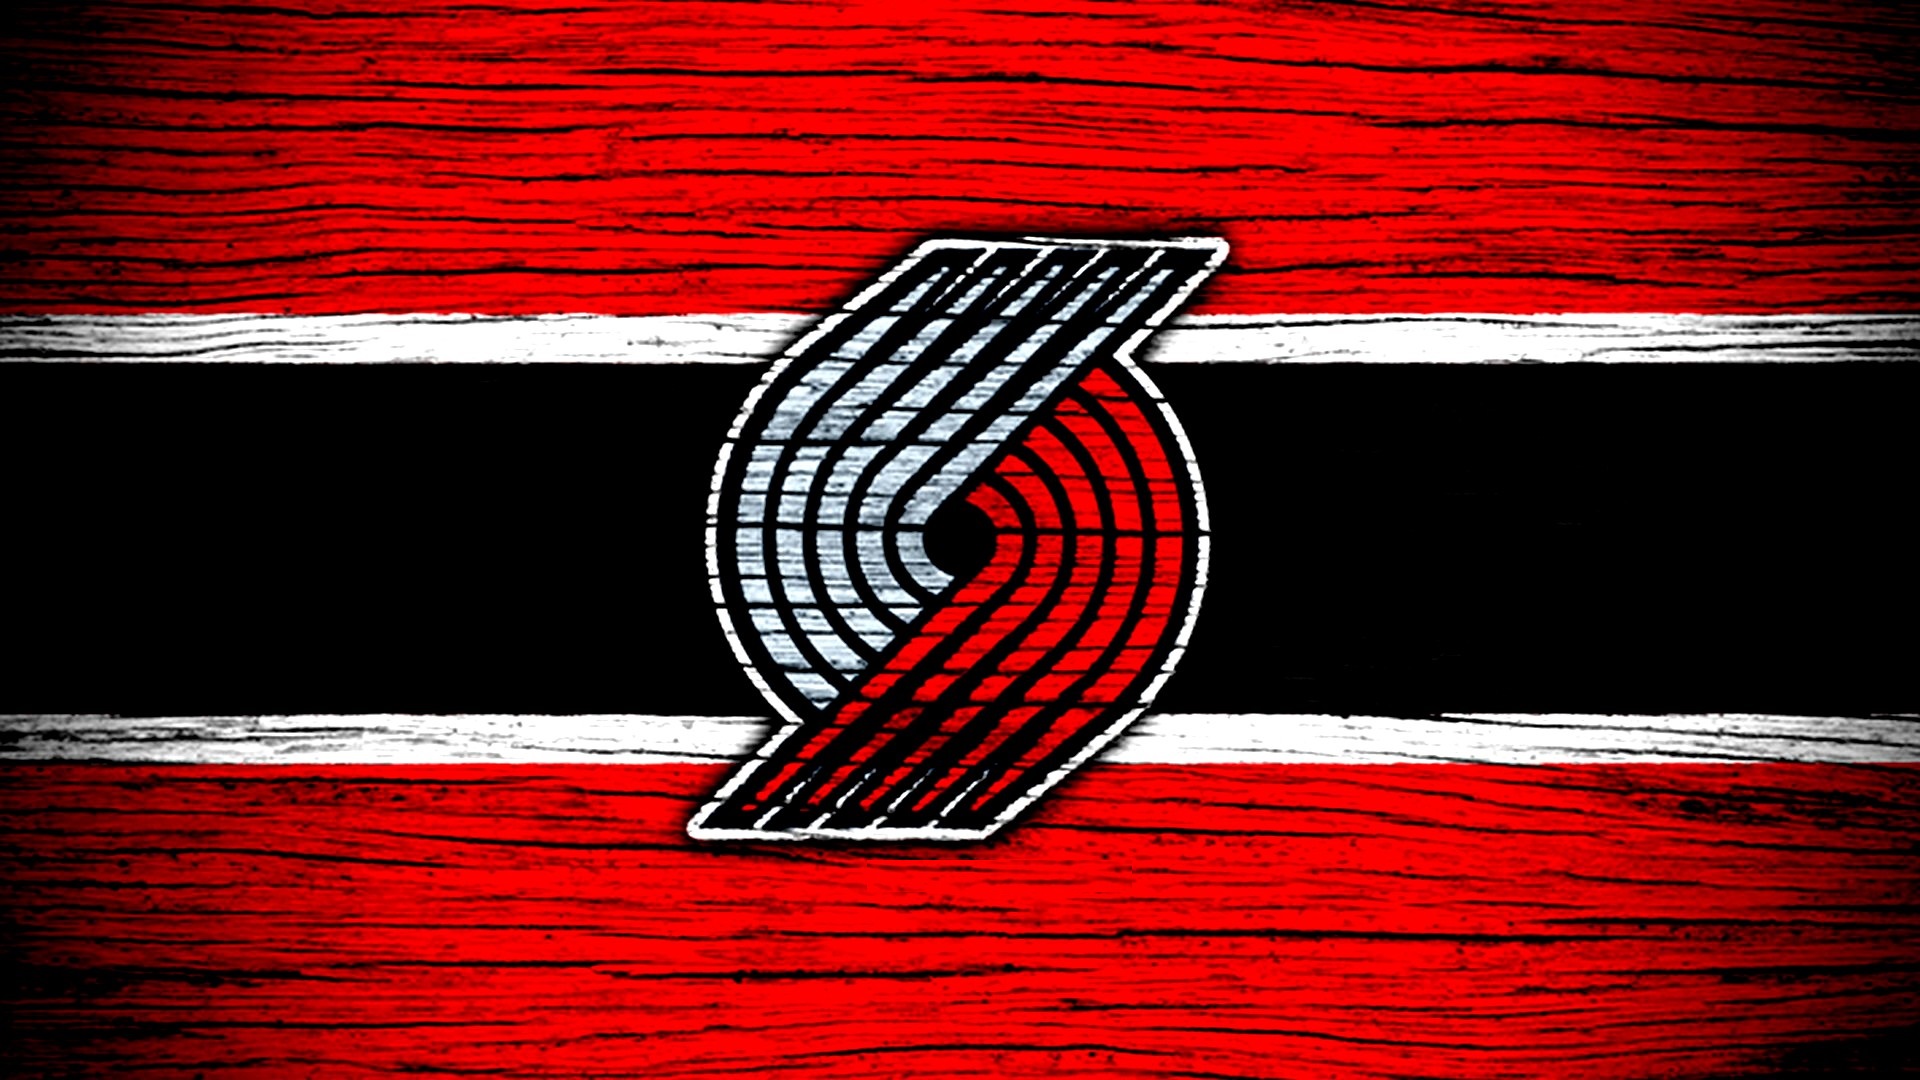 Portland Trail Blazers Wallpaper with high-resolution 1920x1080 pixel. You can use this wallpaper for your Desktop Computer Backgrounds, Windows or Mac Screensavers, iPhone Lock screen, Tablet or Android and another Mobile Phone device